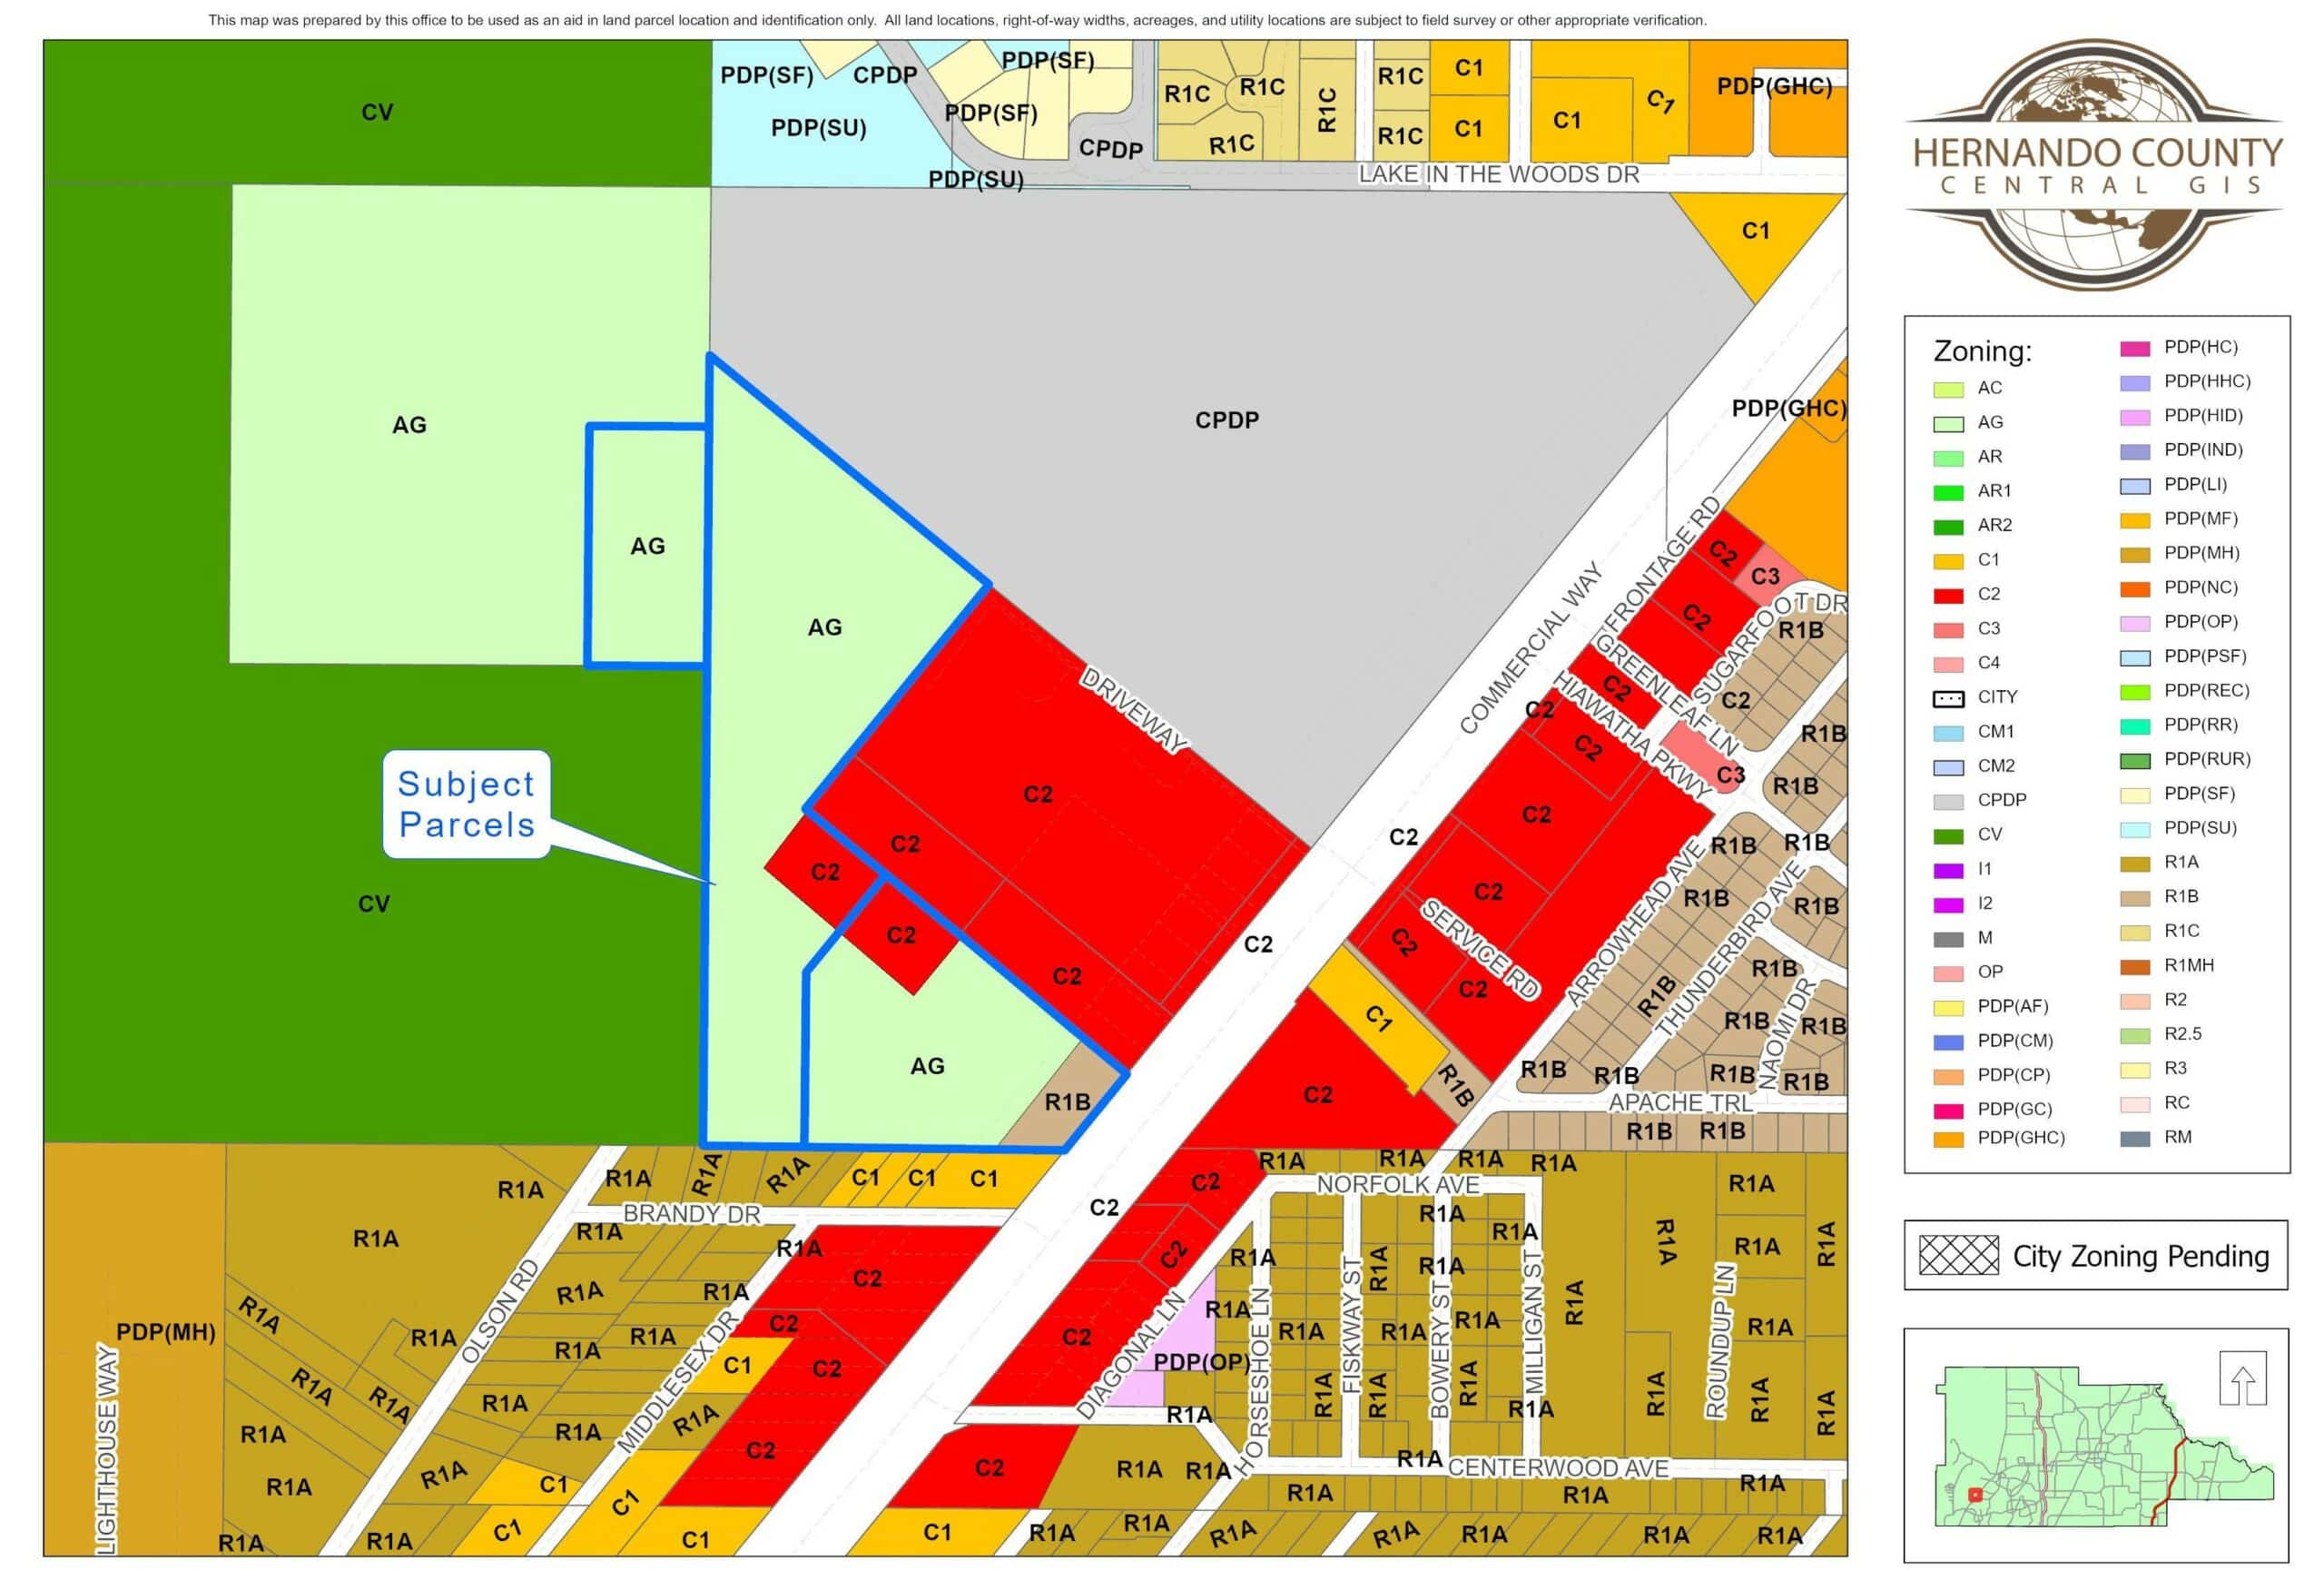 Zoning map prior to rezoning. Surrounding properties are C2 Commercial, C1 Commercial, CV Conservation, AG Agriculture, R1A Residential, CPDP Commercial Planned Development Project. [Credit: Hernando County Planning Department / Central GIS]